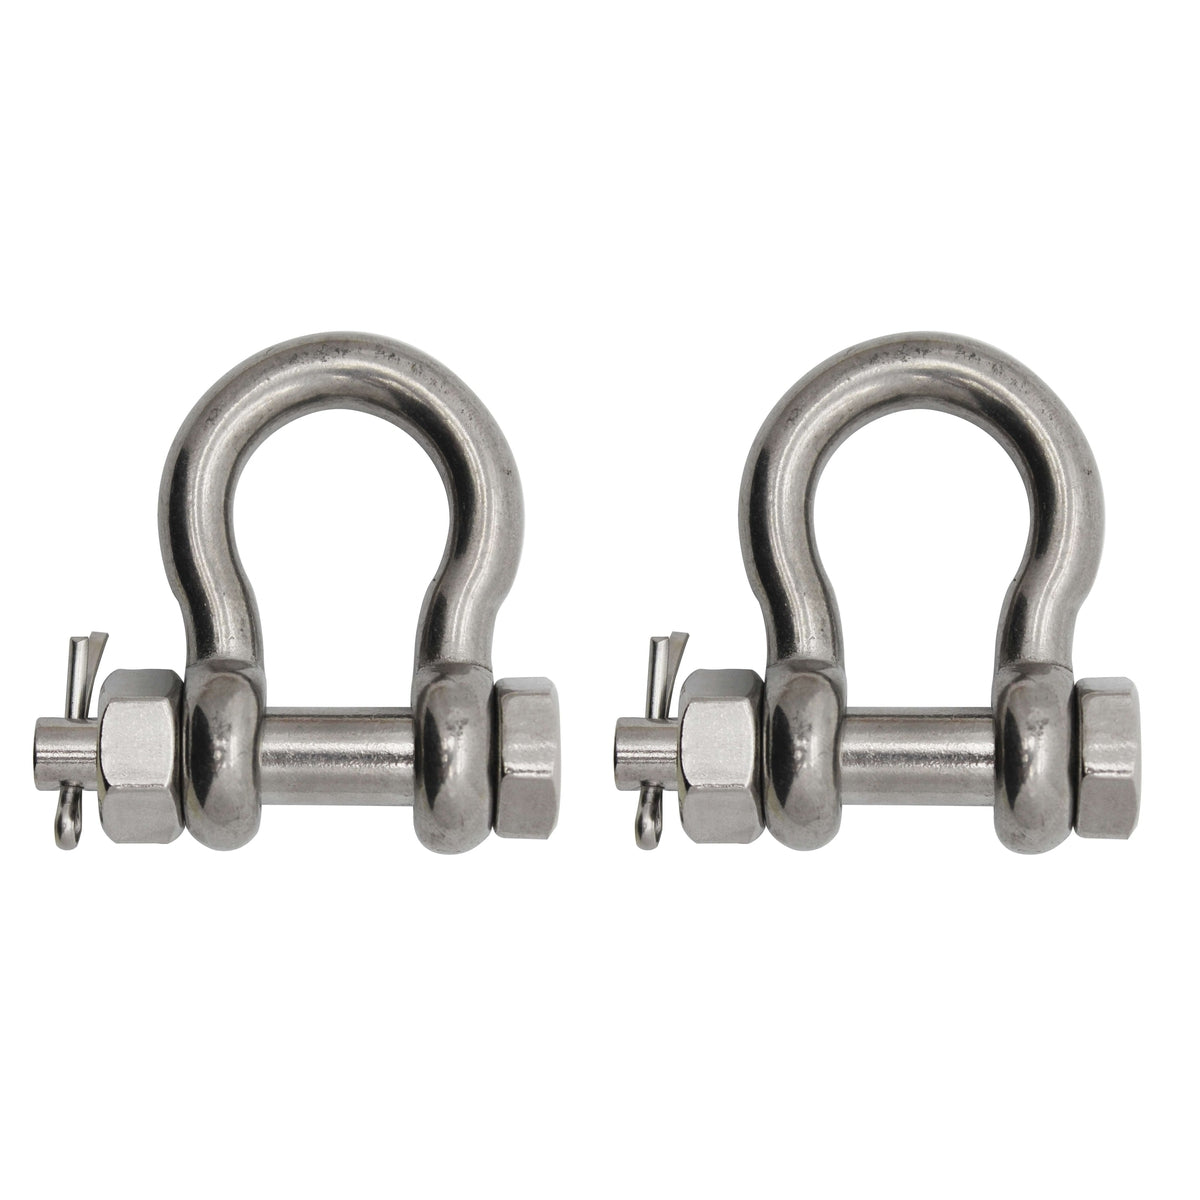 Extreme Max SS Bolt-Type Anchor Shackle 1" 2-pk #3006.8389.2